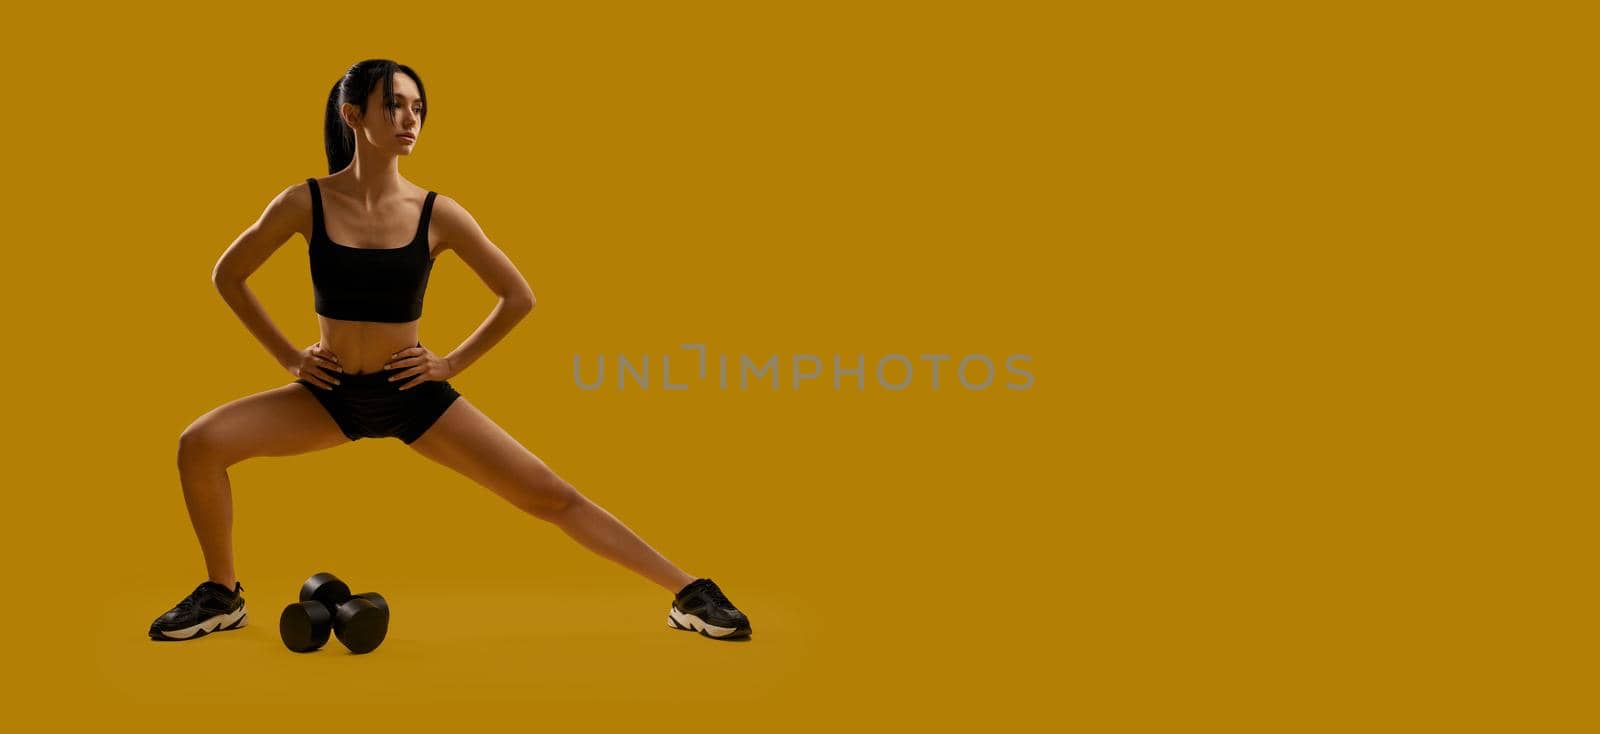 Front view of sporty, slim female exercising, working out, training. Young woman stretching, making step with hands on waist, looking aside. Isolated on yellow studio background.